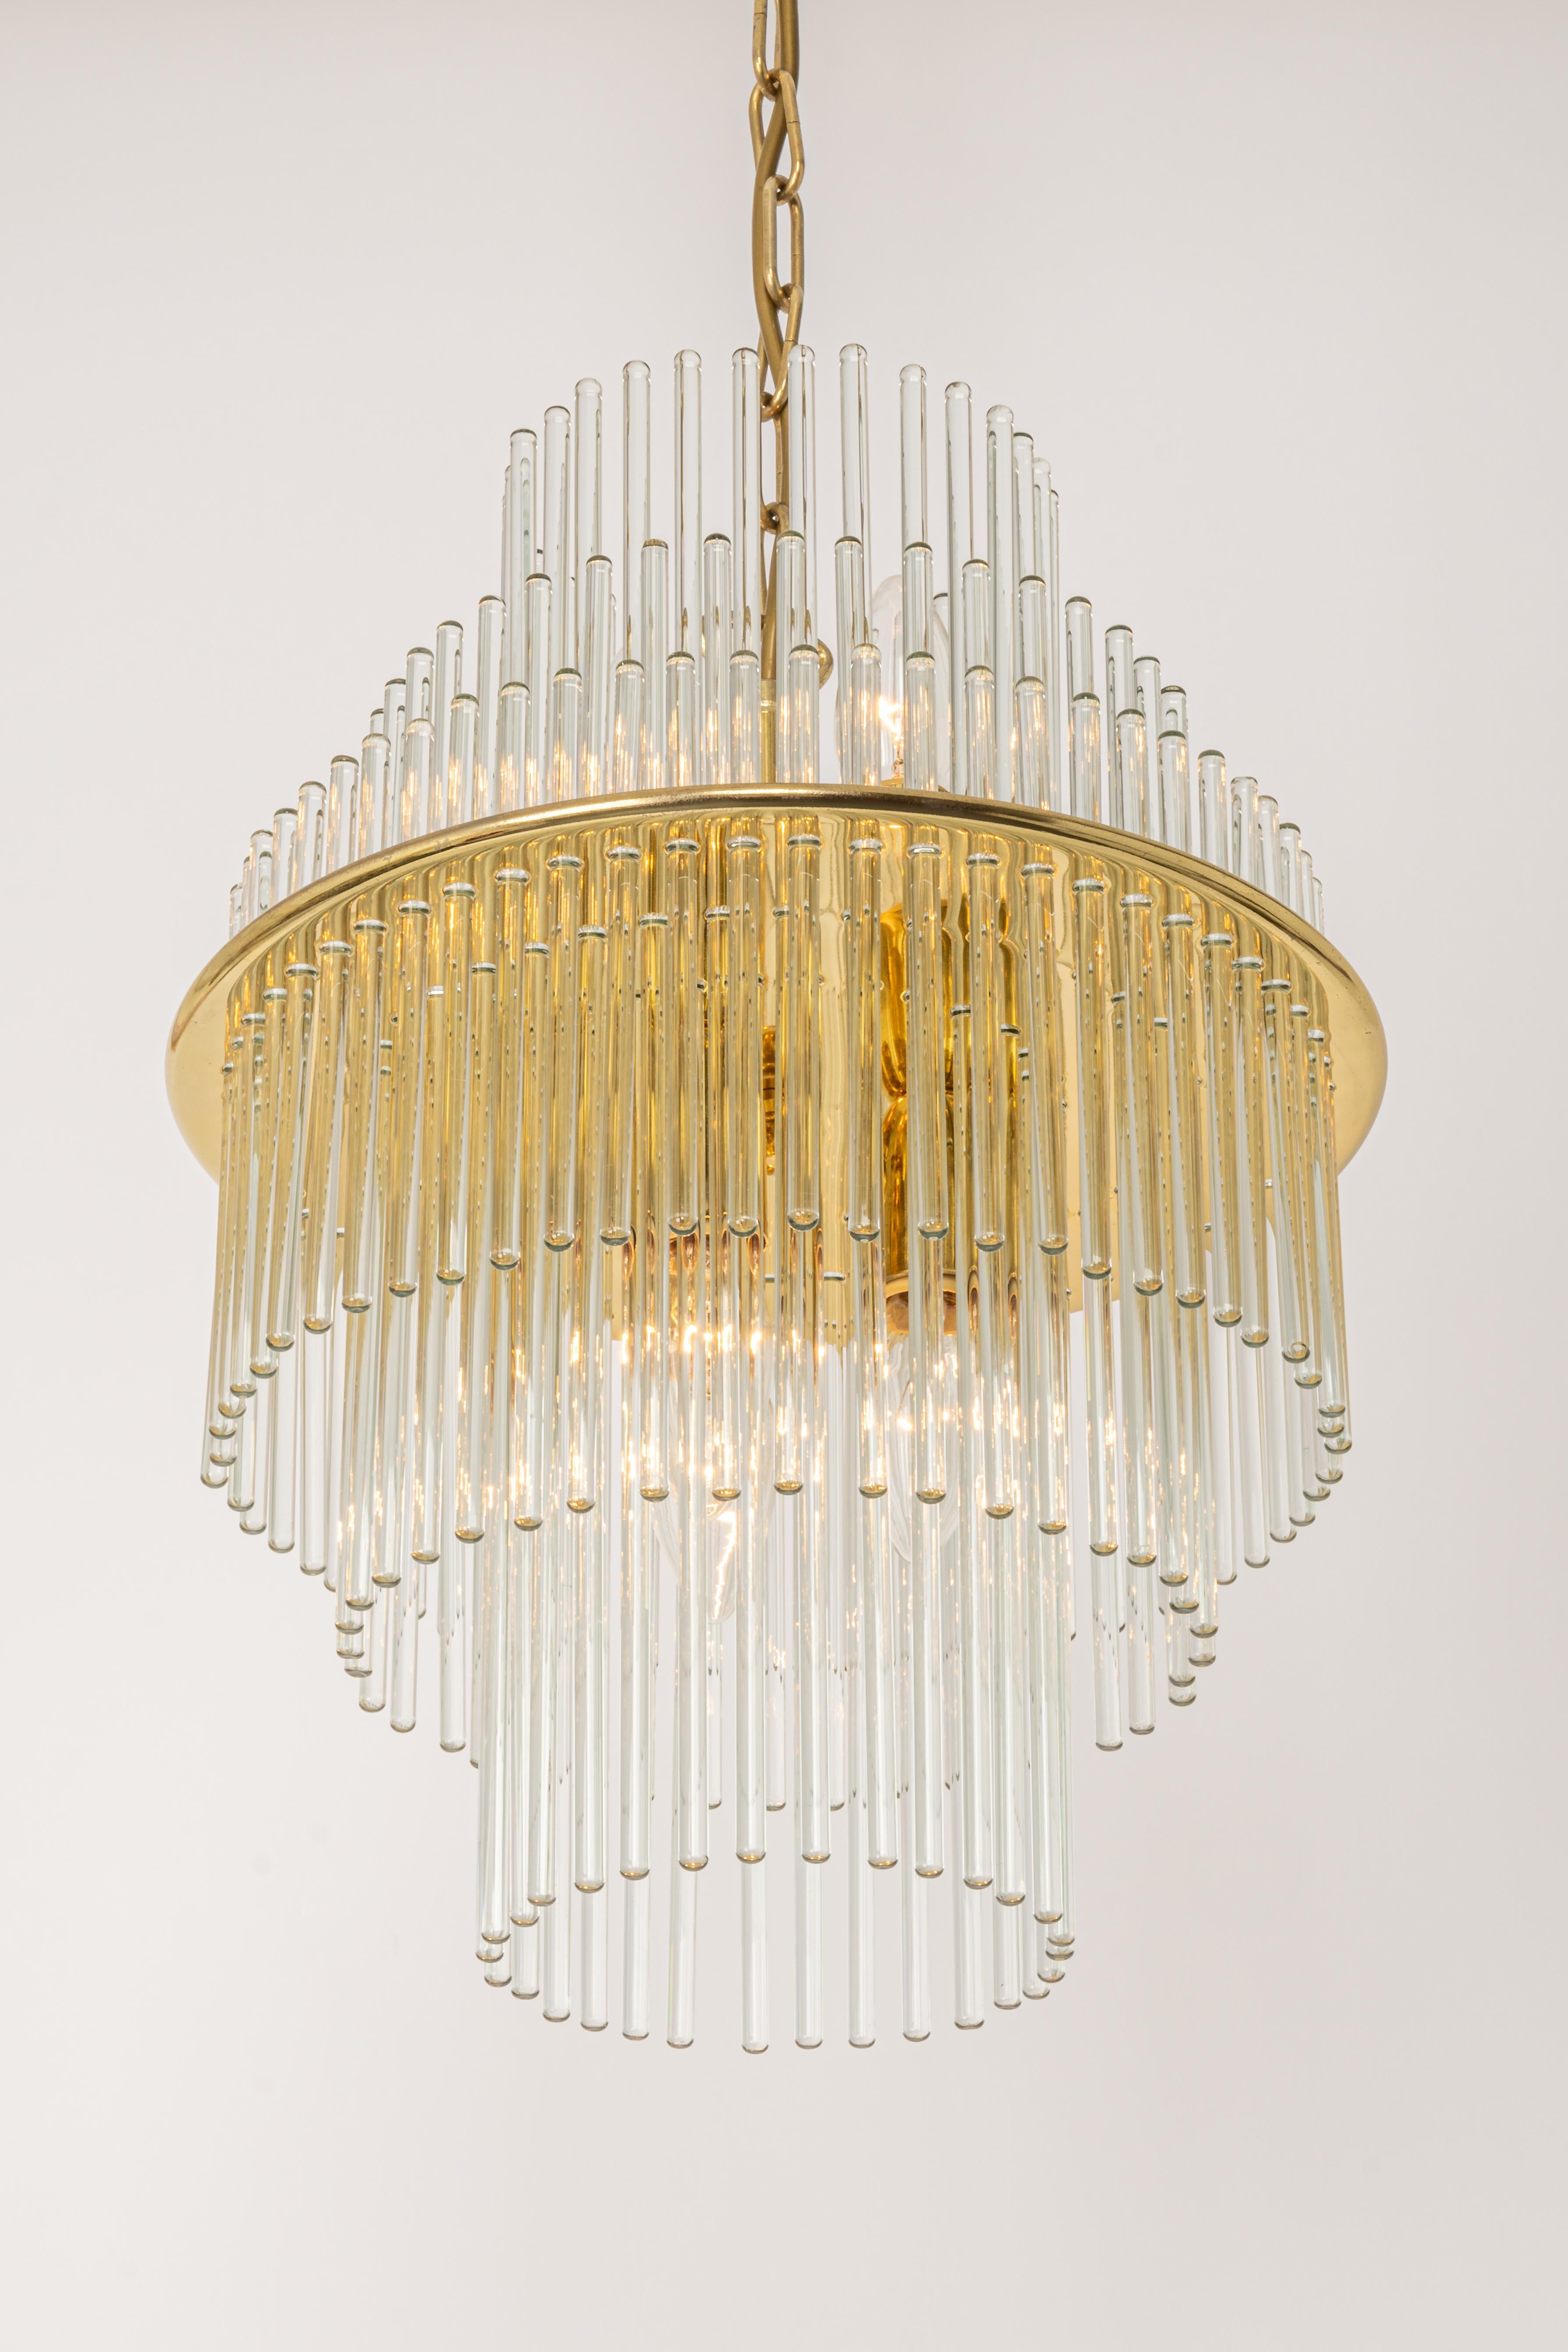 1 of 2 Petite Crystal Glass Rod Pendant Light, Germany, 1970s For Sale 3